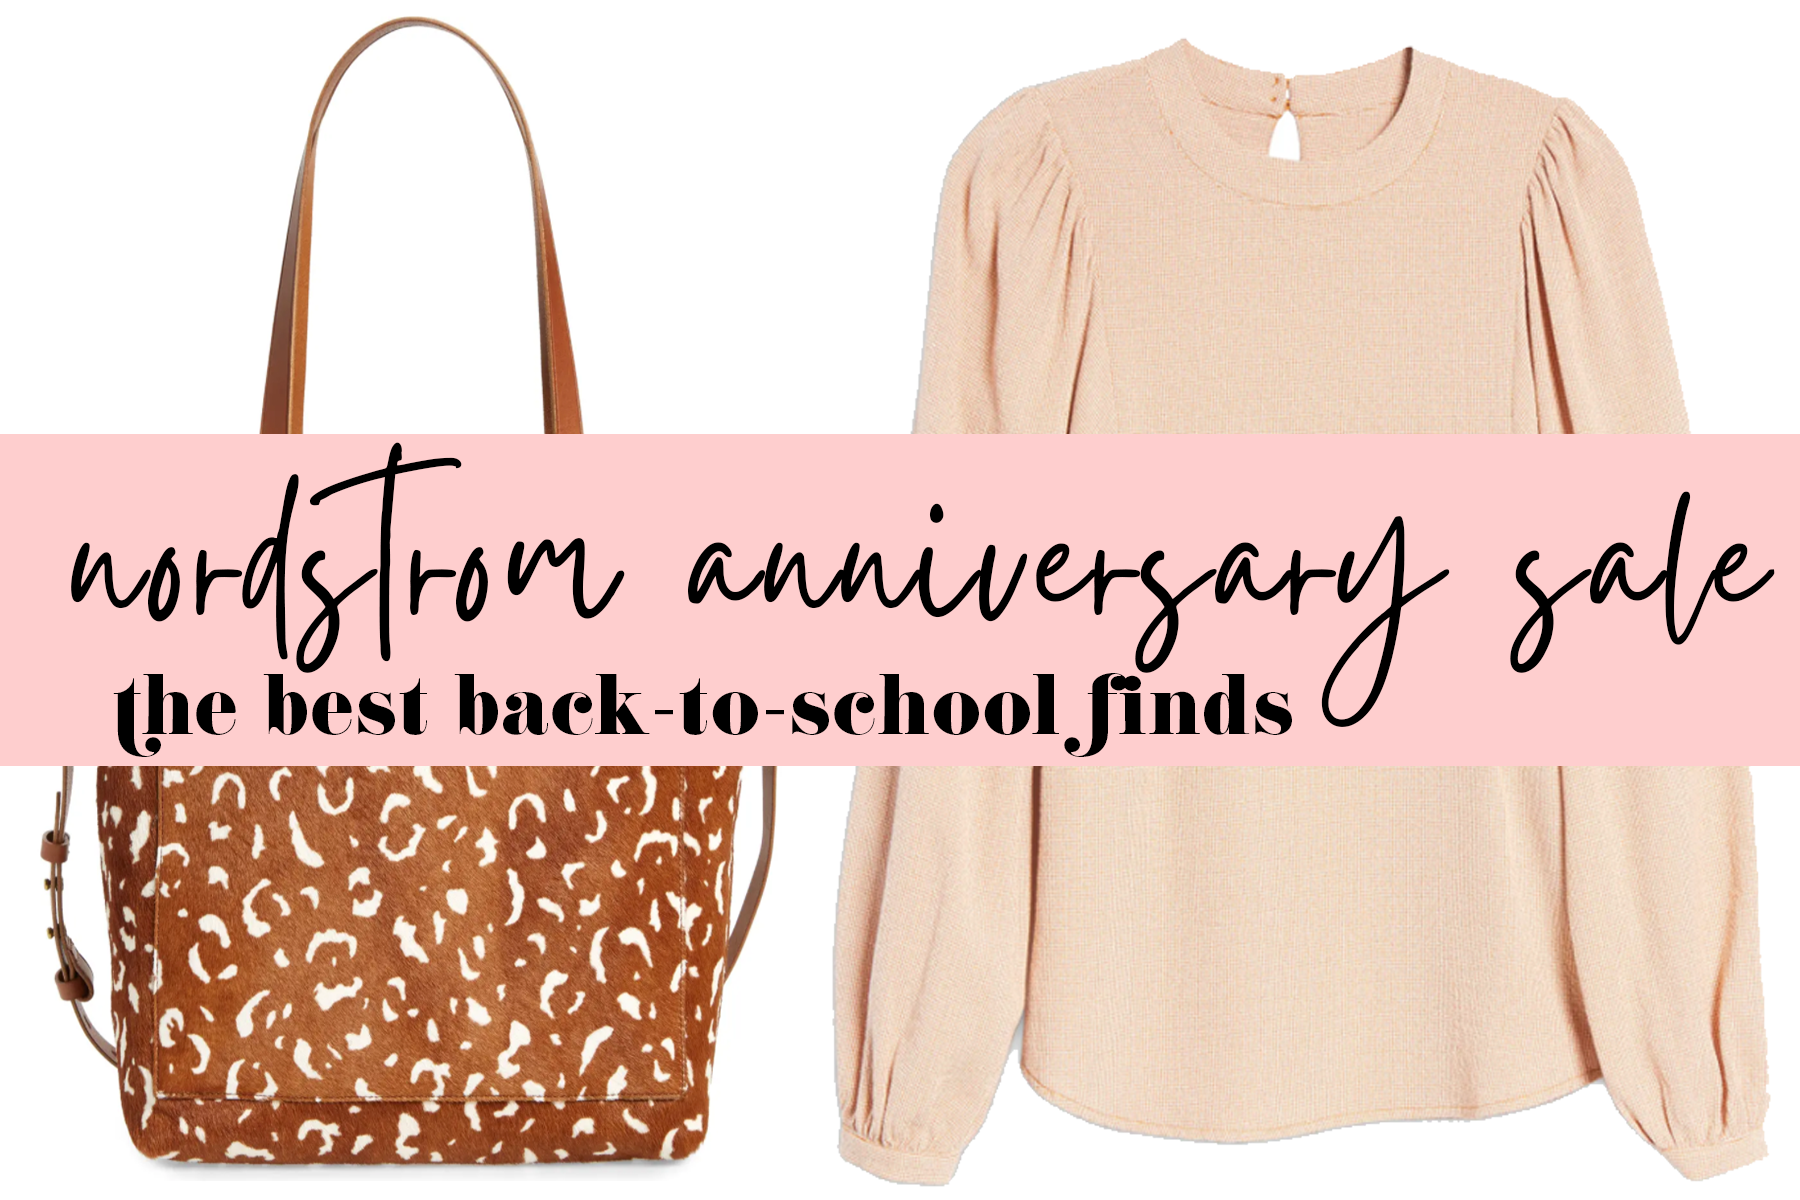 back-to-school shopping at Nordstrom for teachers